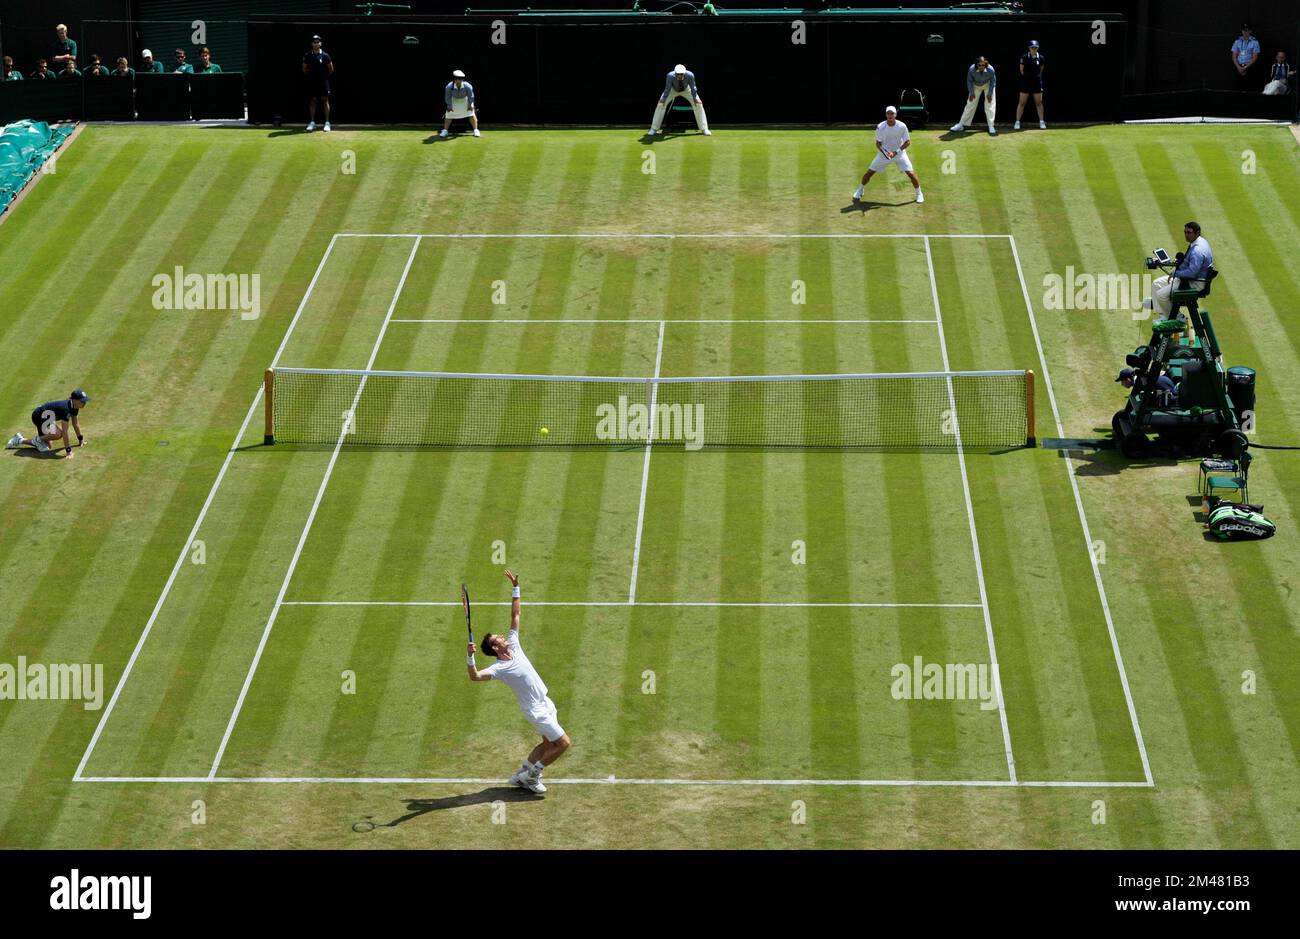 Andy Murray, Wimbledon tennis Championships 2014, Wimbledon London. Hommes célibataires 2nd Round Match, Andy Murray (GB) (3) v Blaž Rola (Slo) No1 court. Banque D'Images